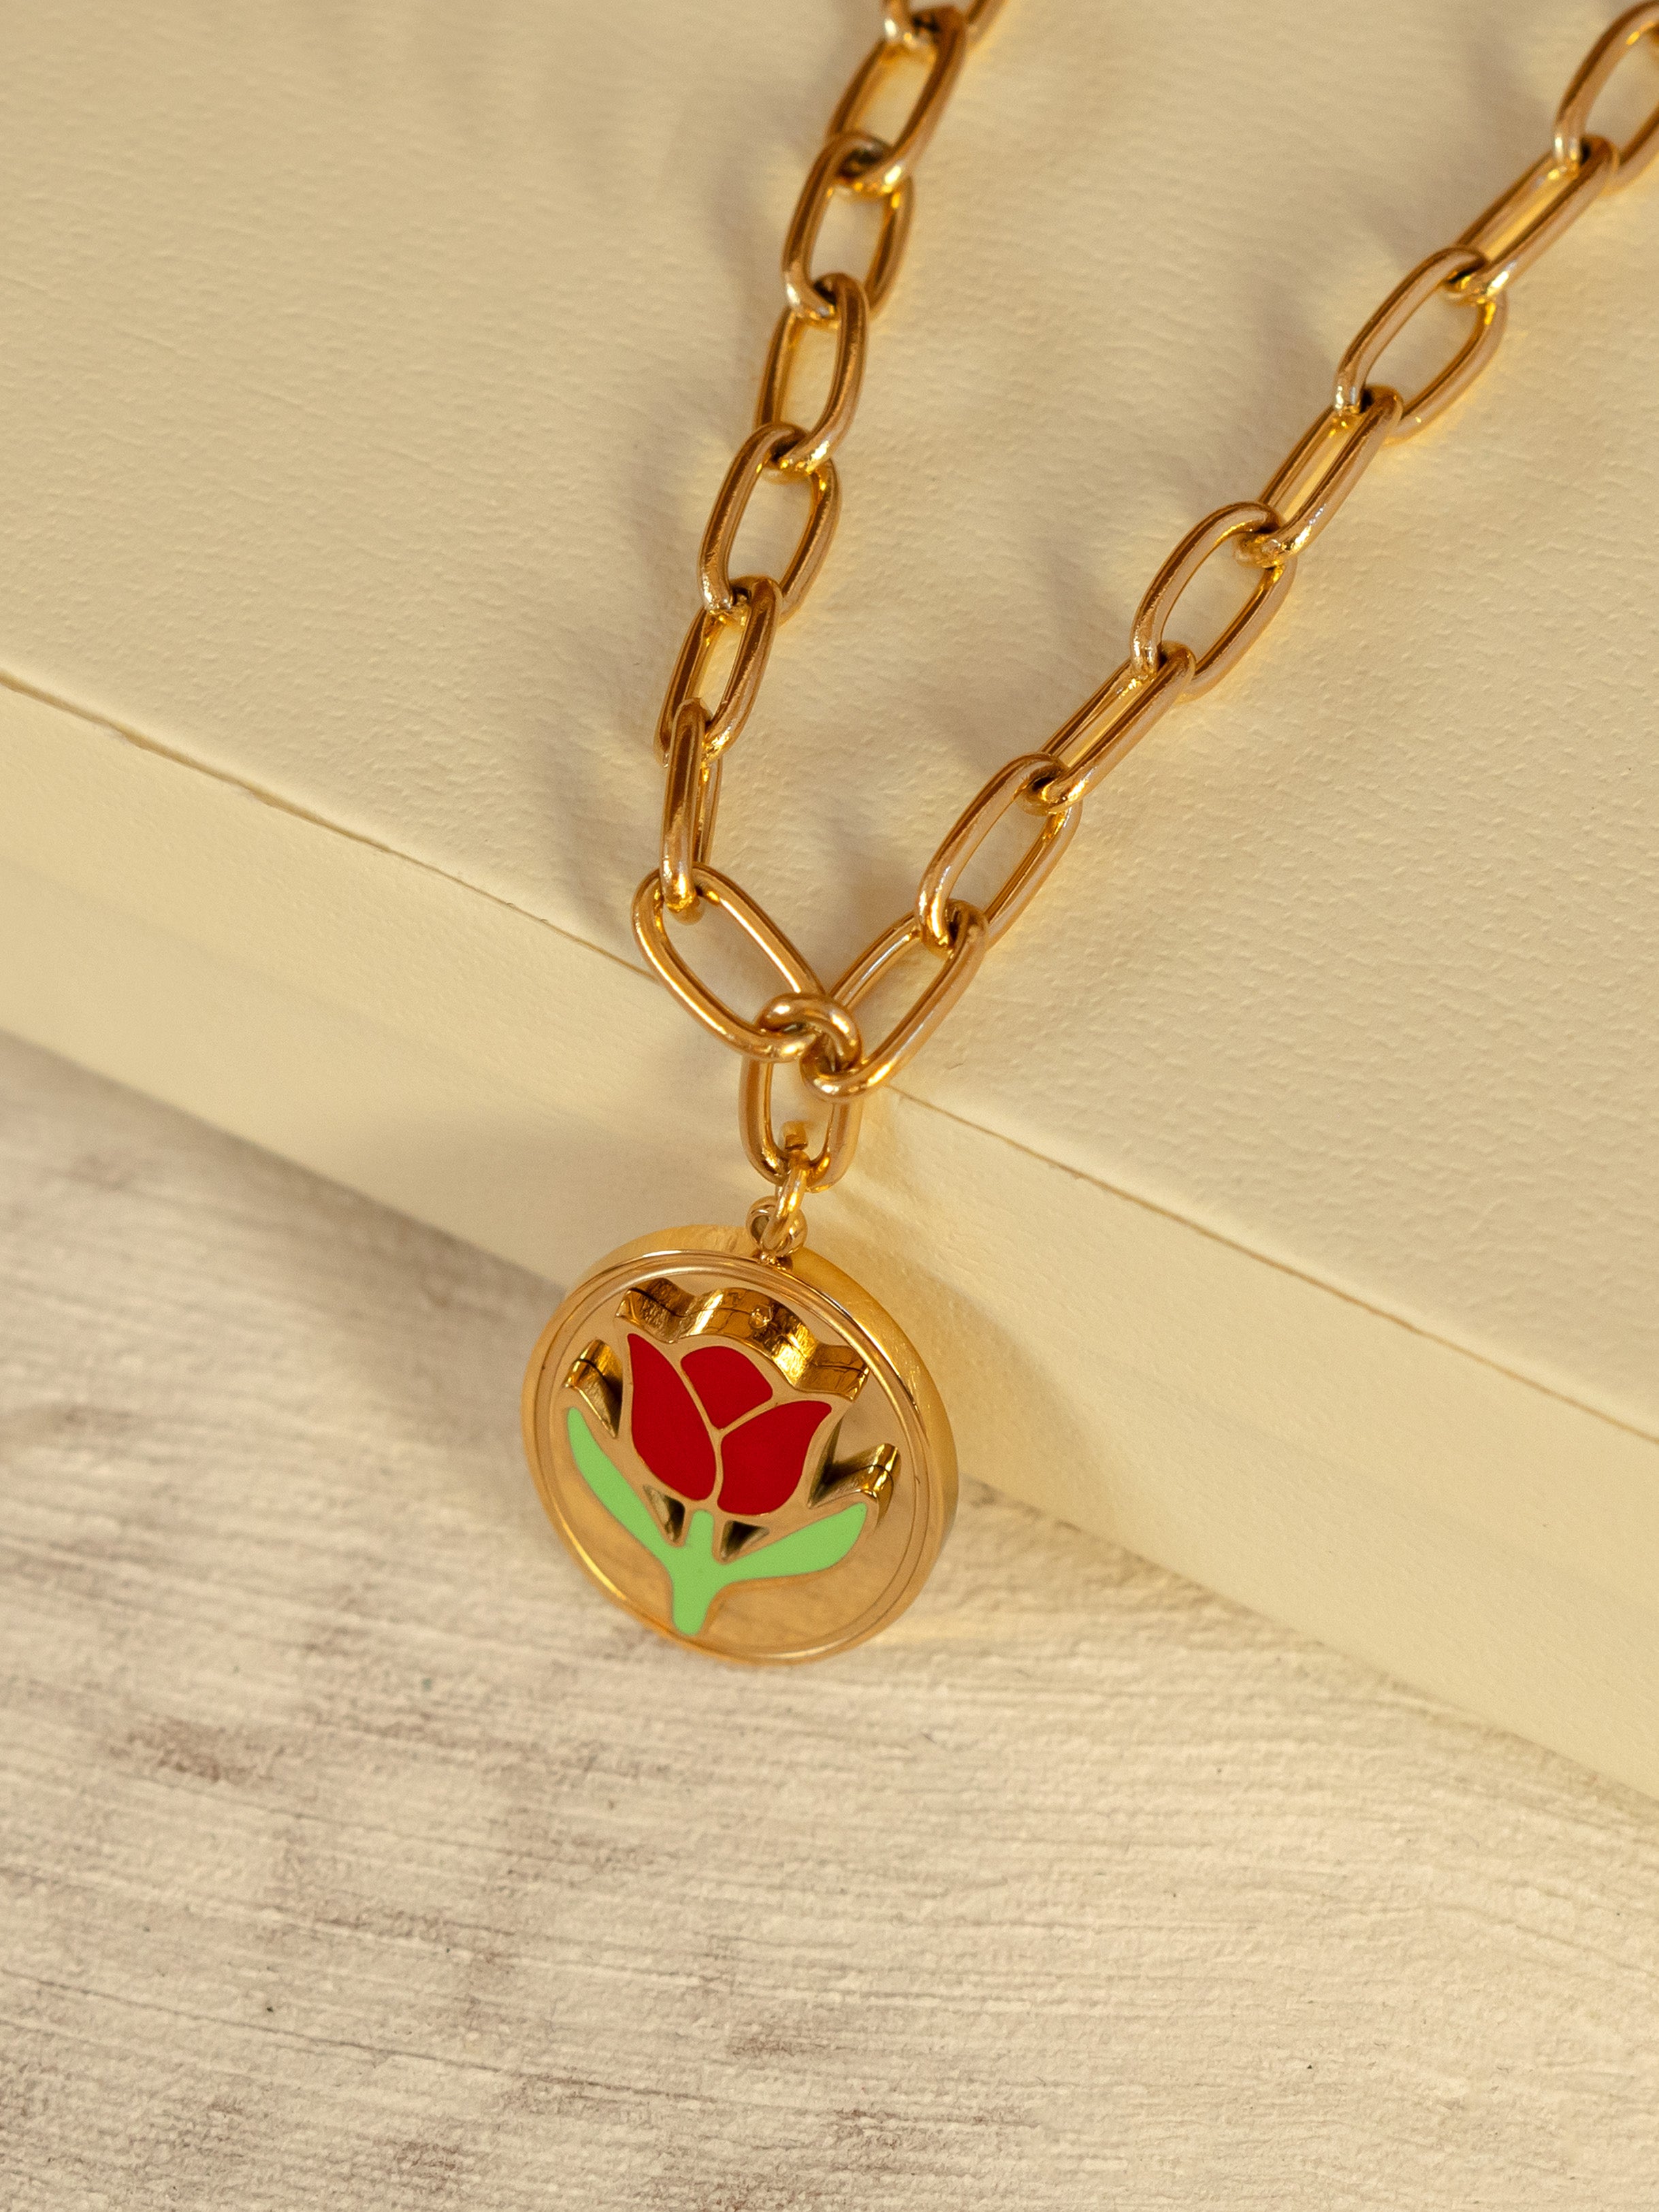 Gold Link Chain Necklace With Enamel Tulip Coin